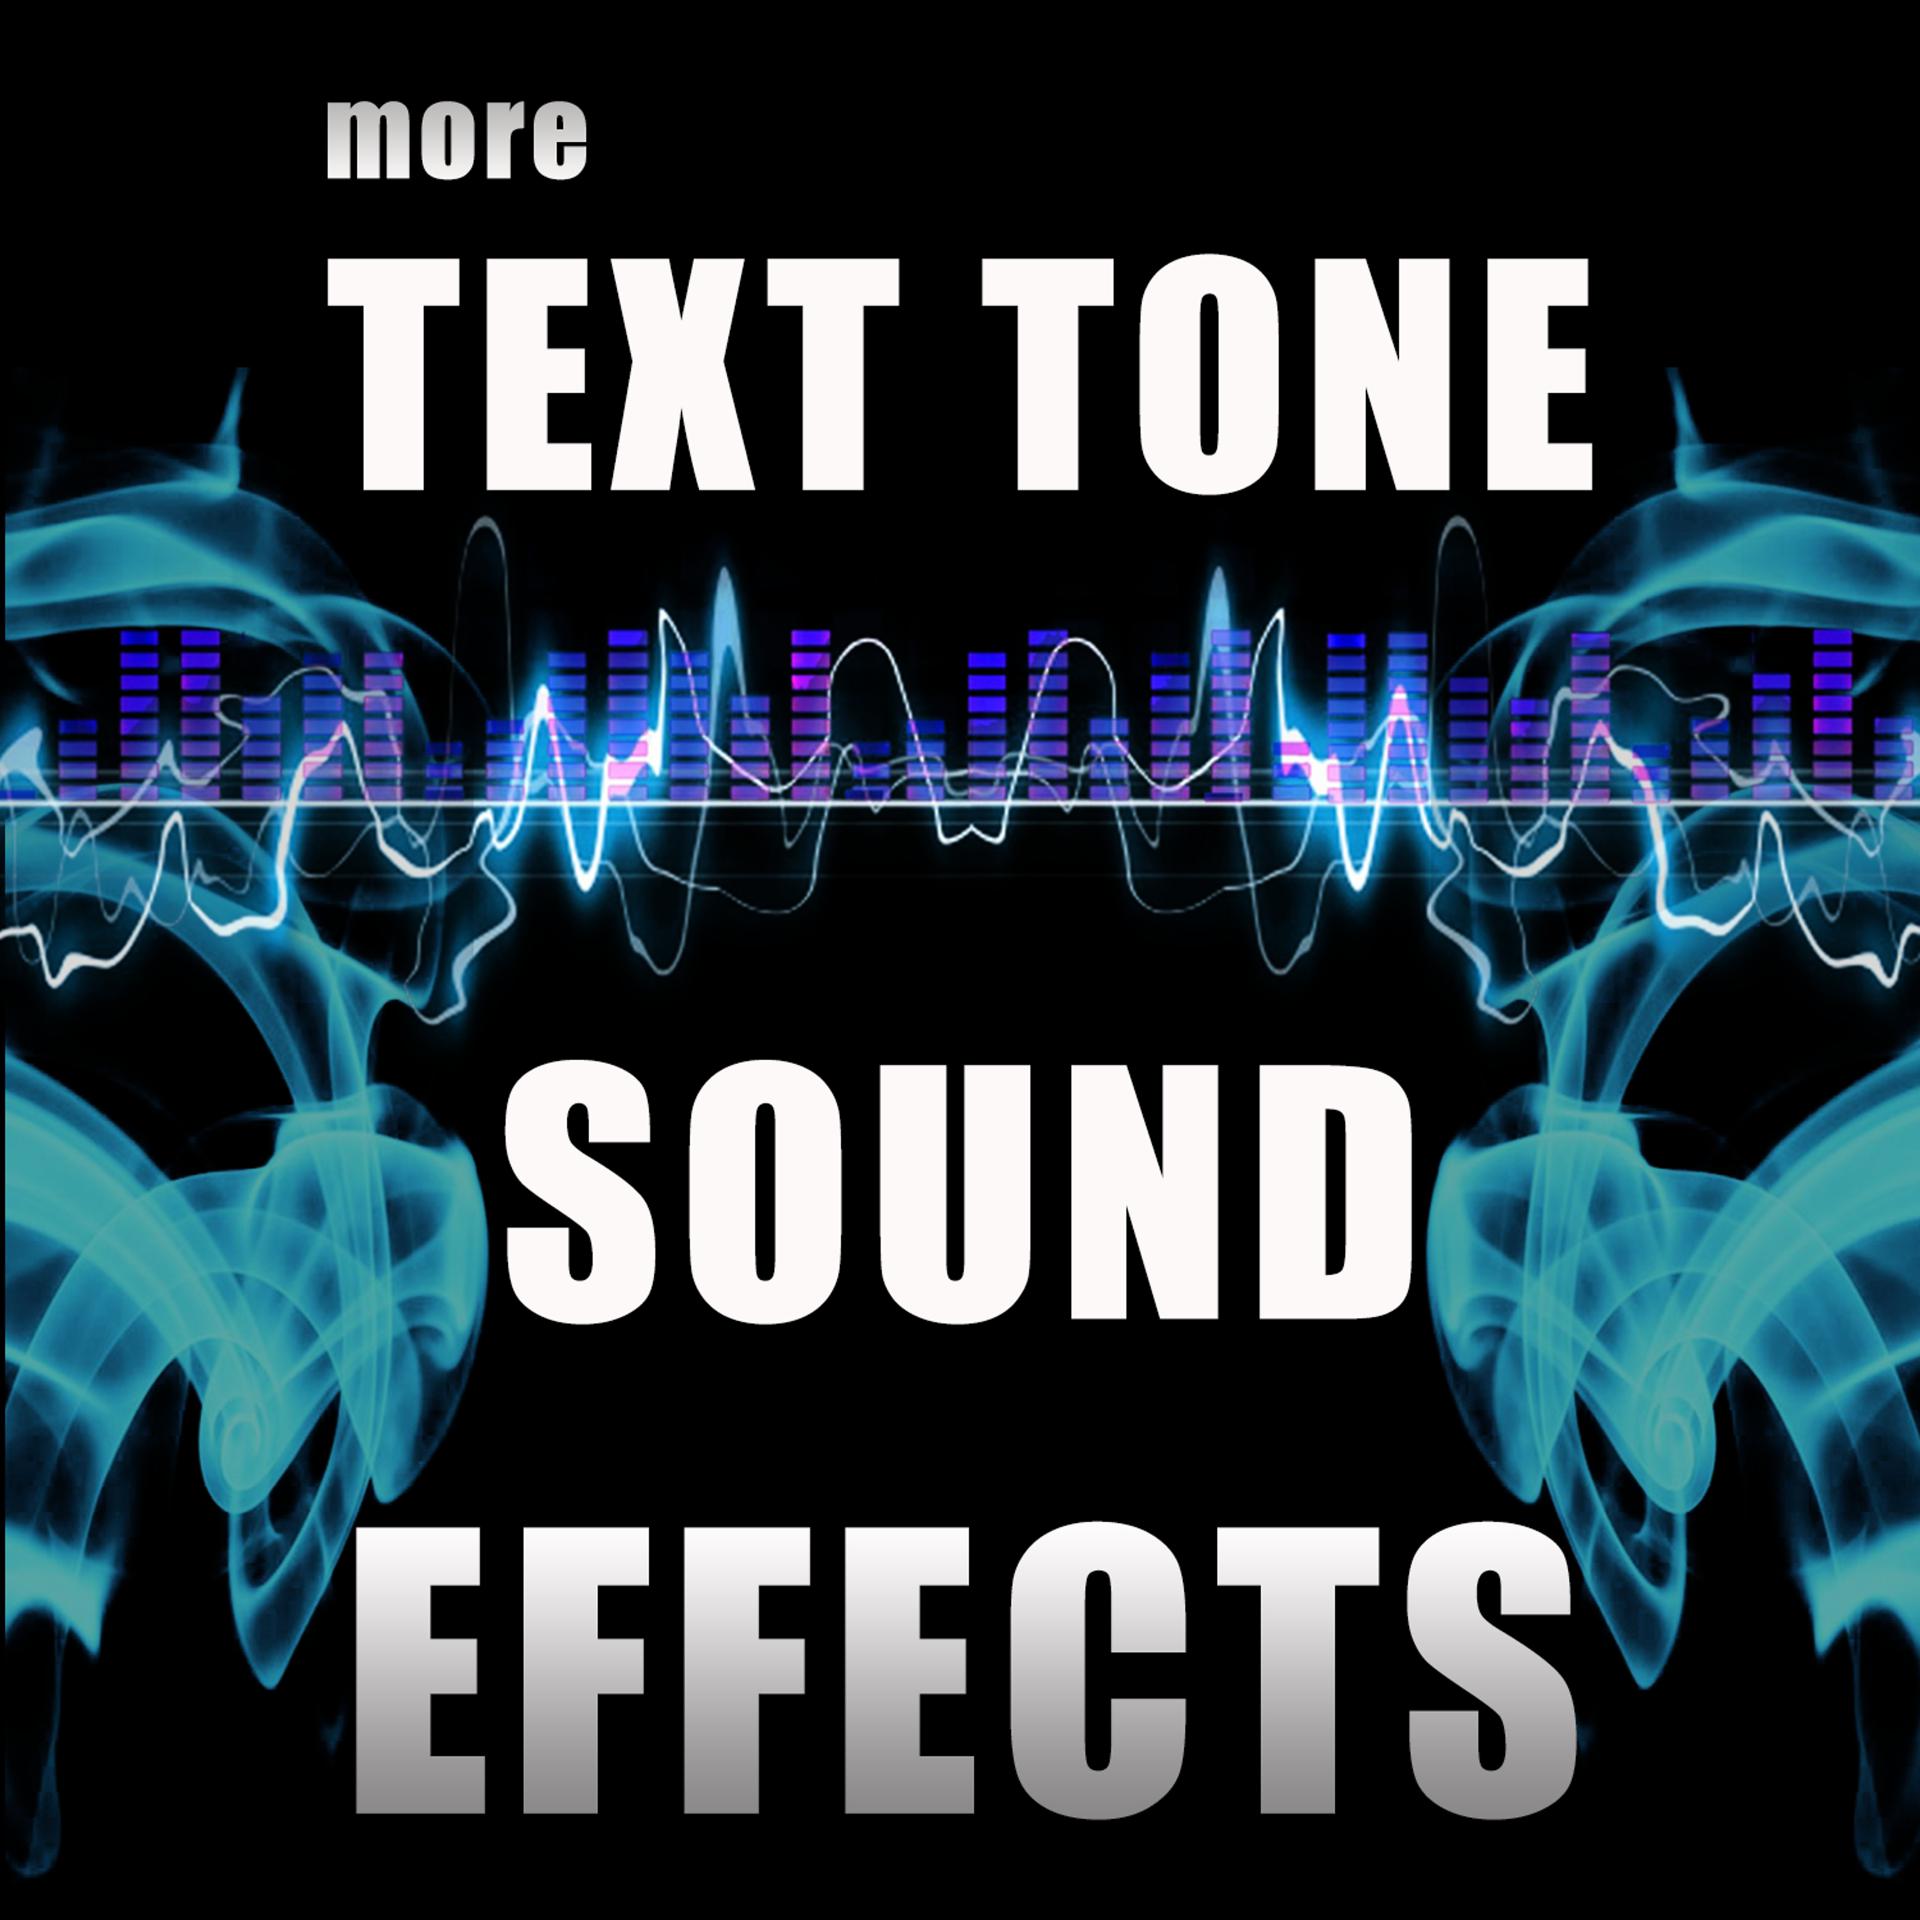 Sound tone. Tone of the text.